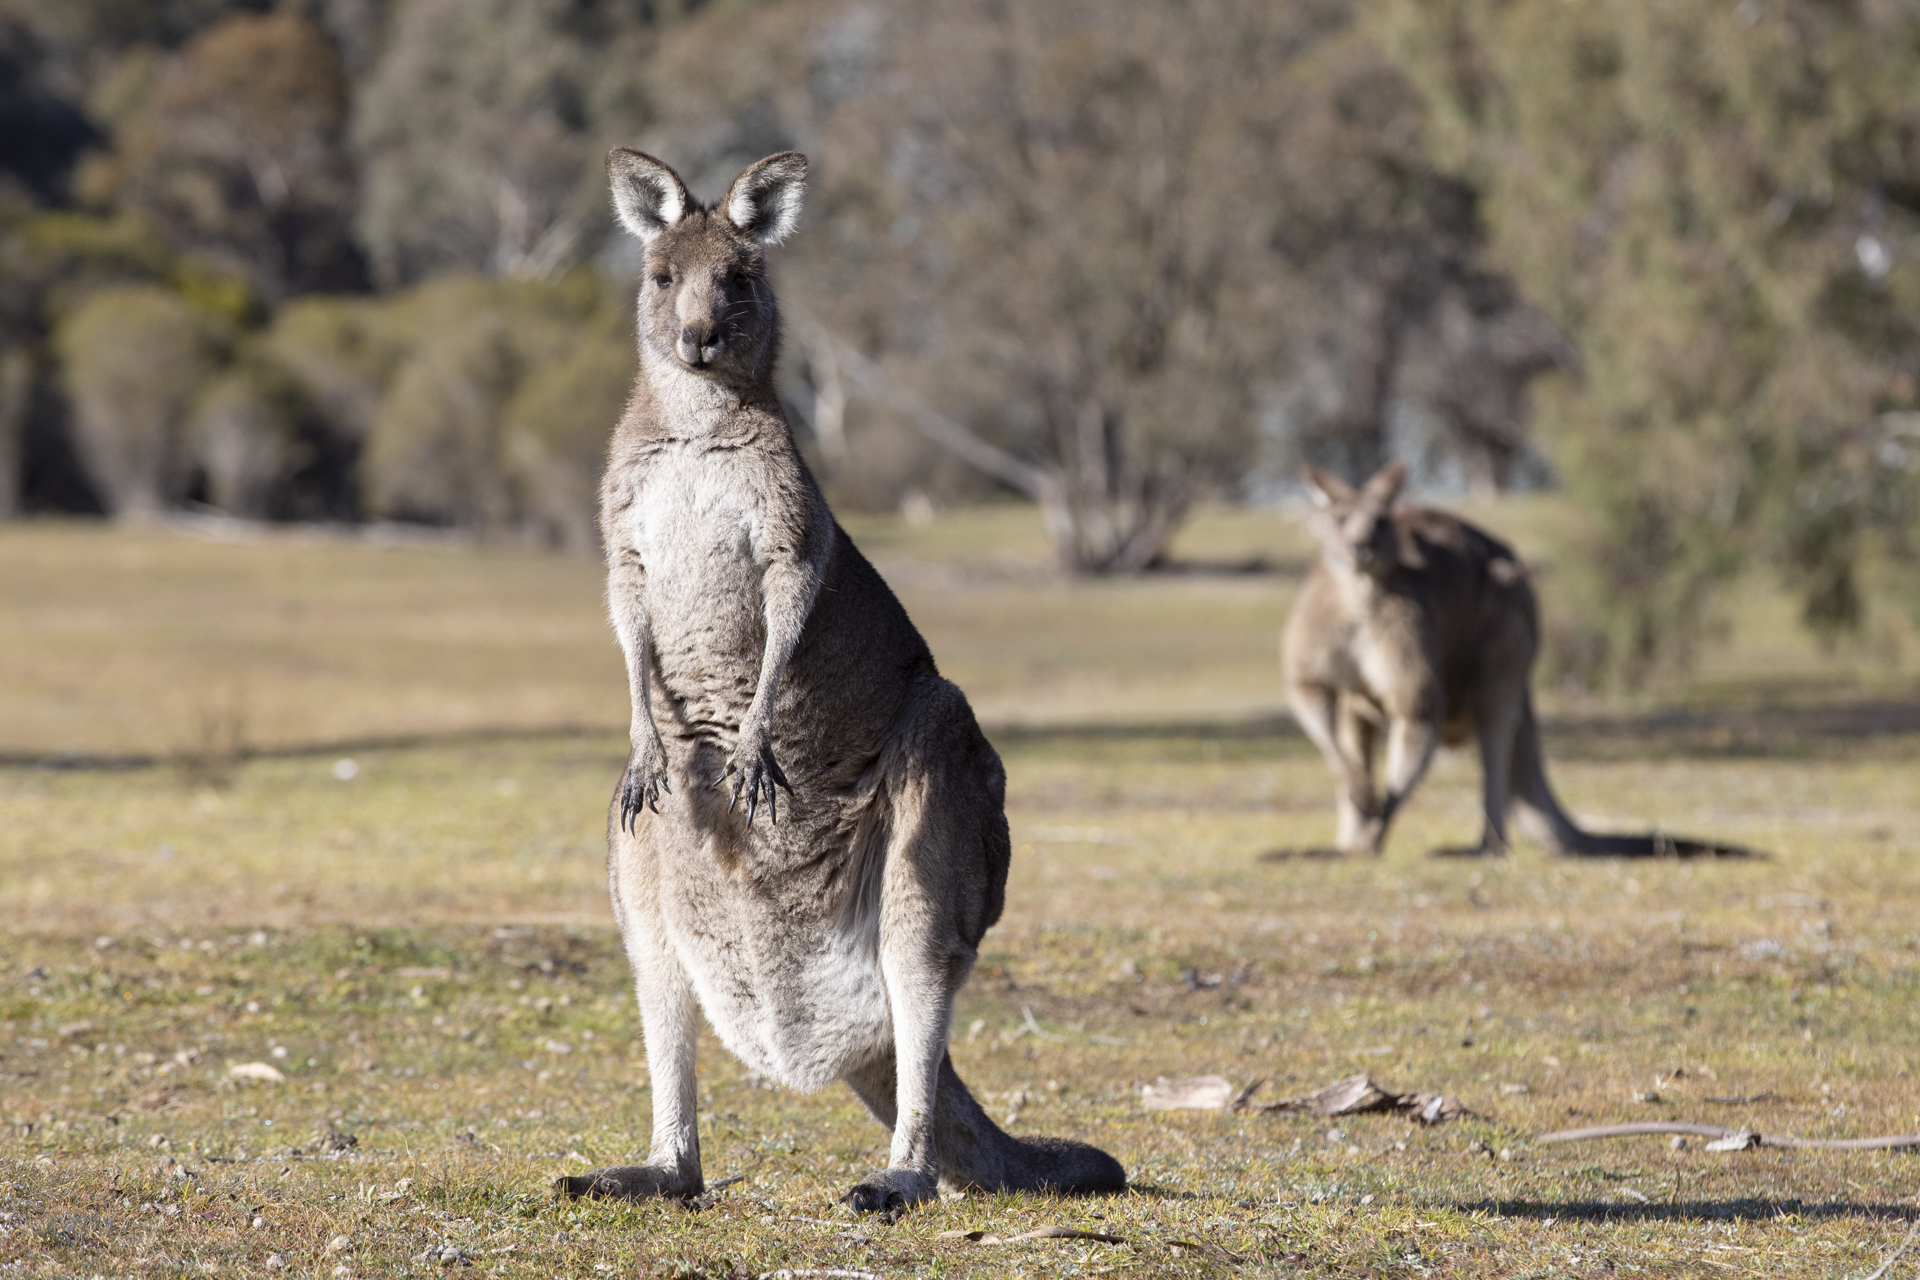 Where do kangaroos go when they die? And other facts about Canberra's conservation cull